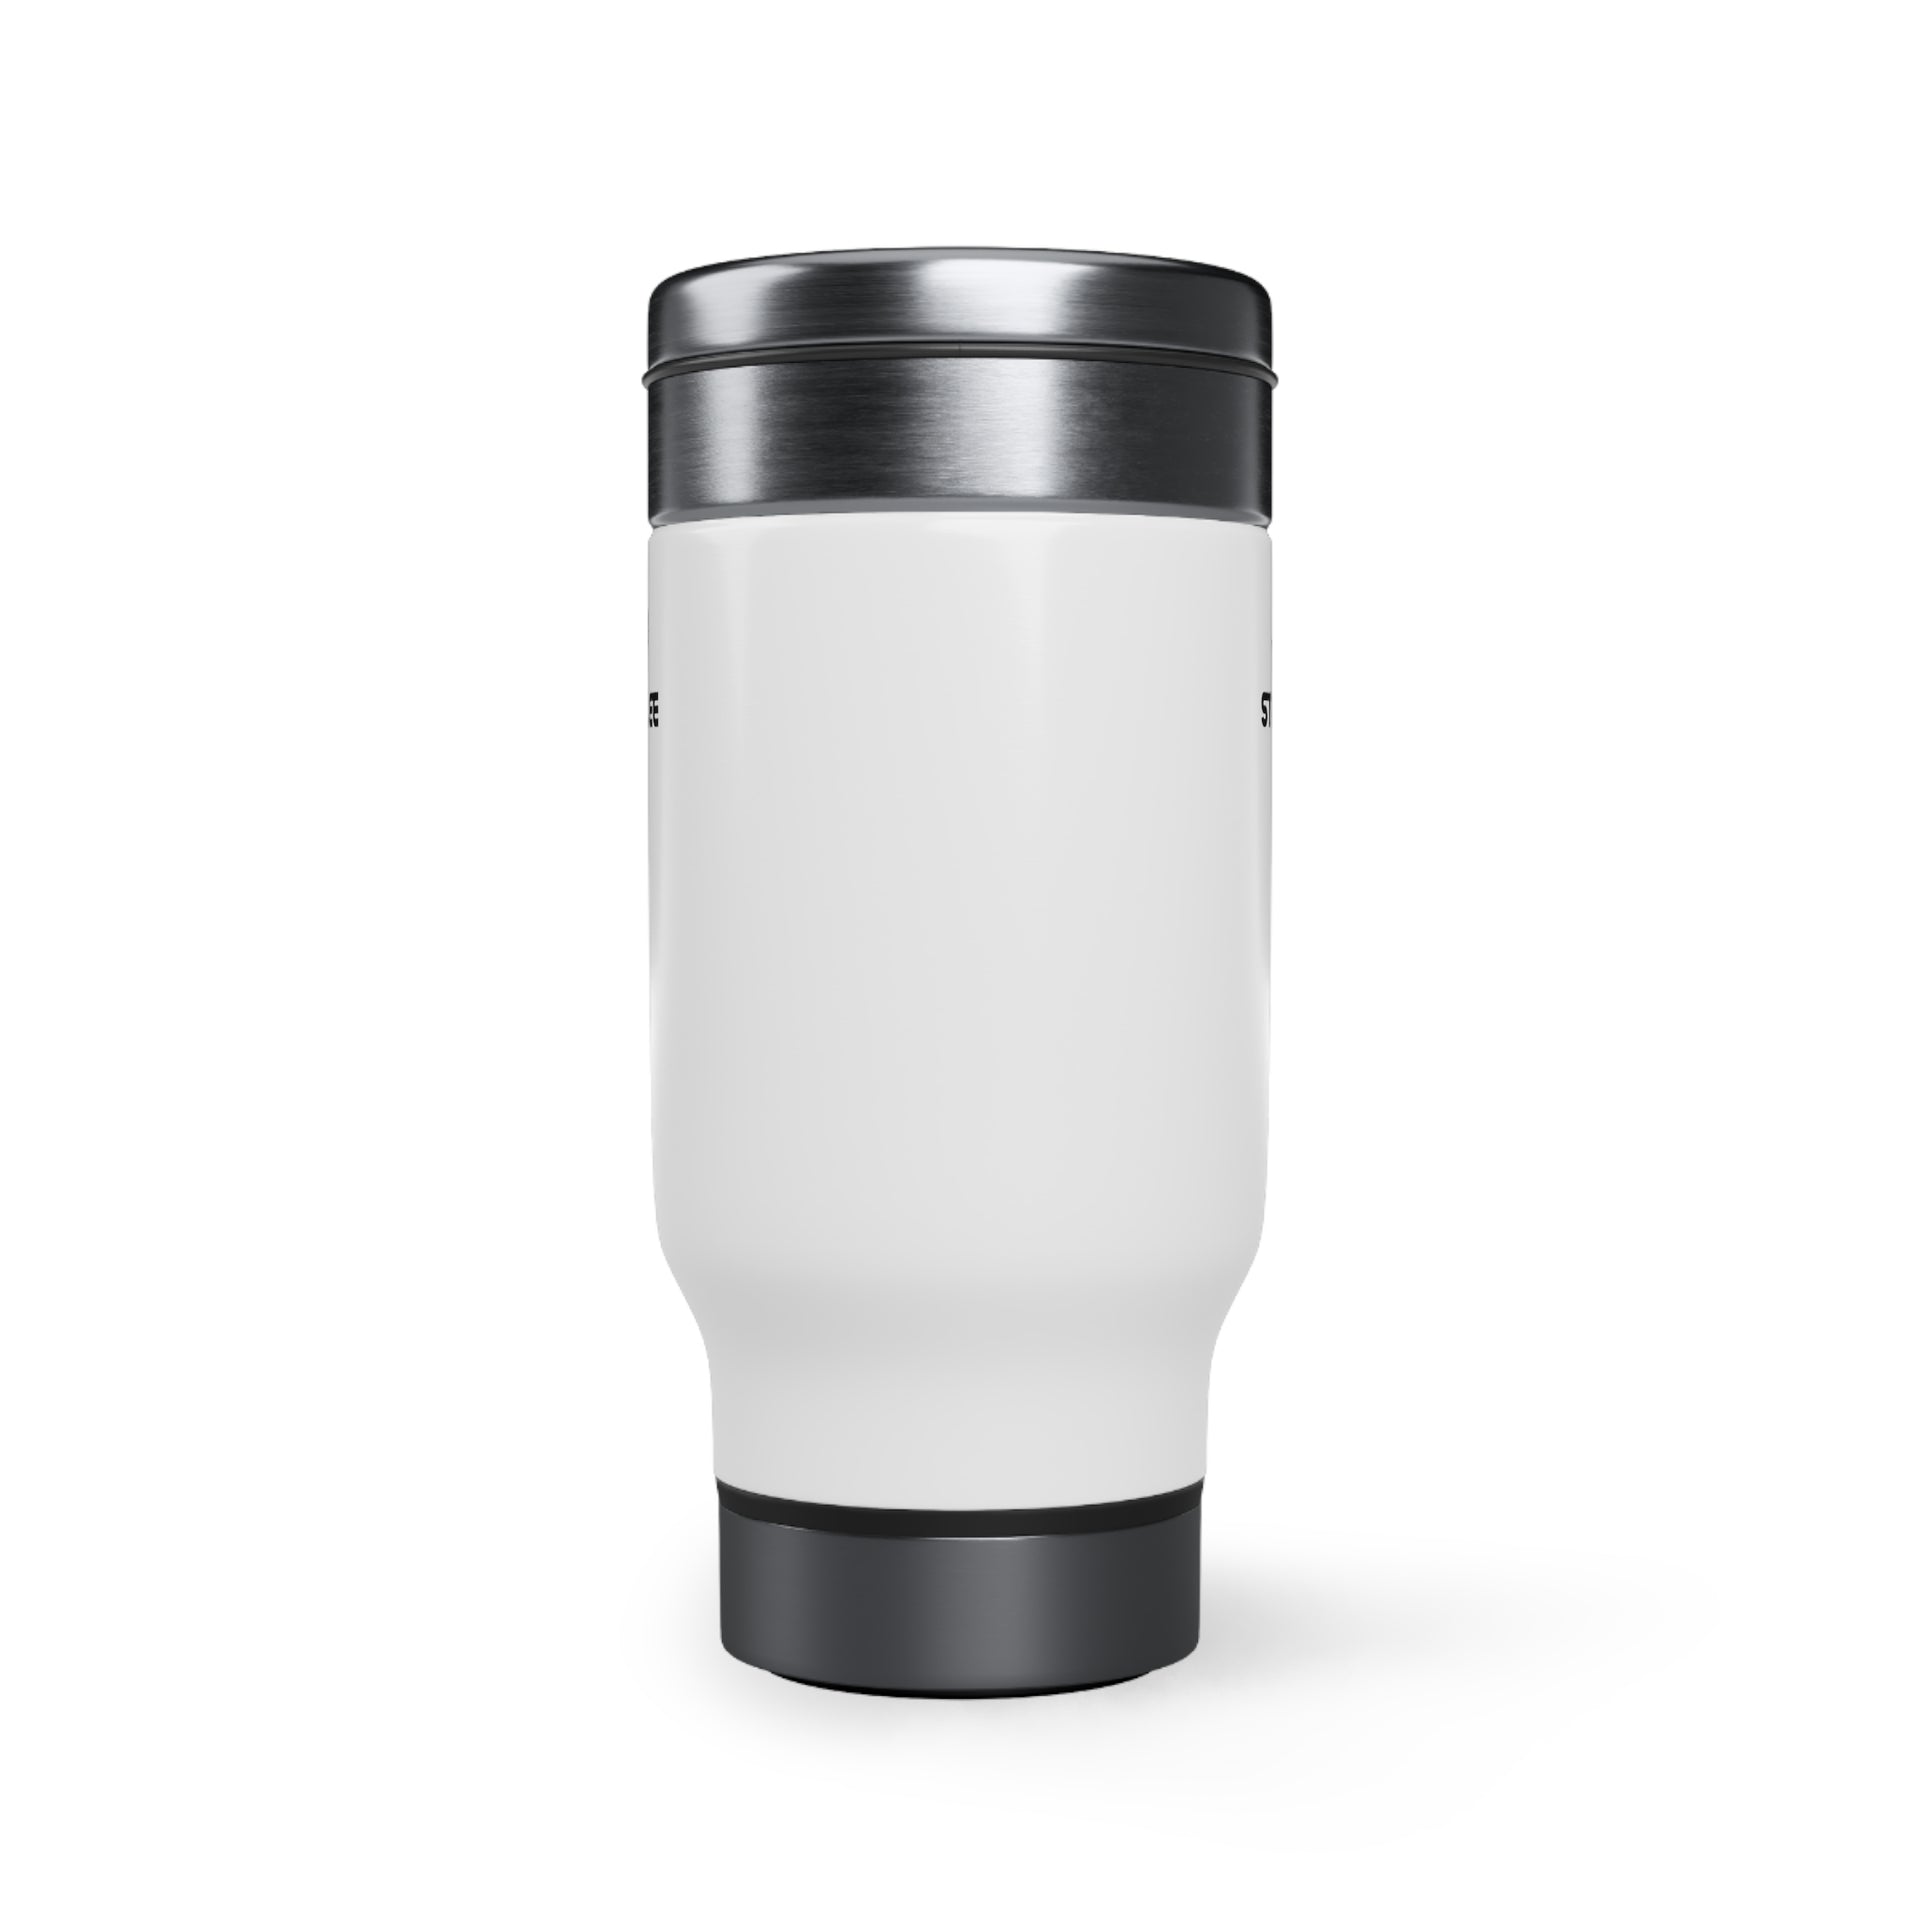 STANLEE TUMBLER Stainless Steel Travel Mug with Handle, 14oz